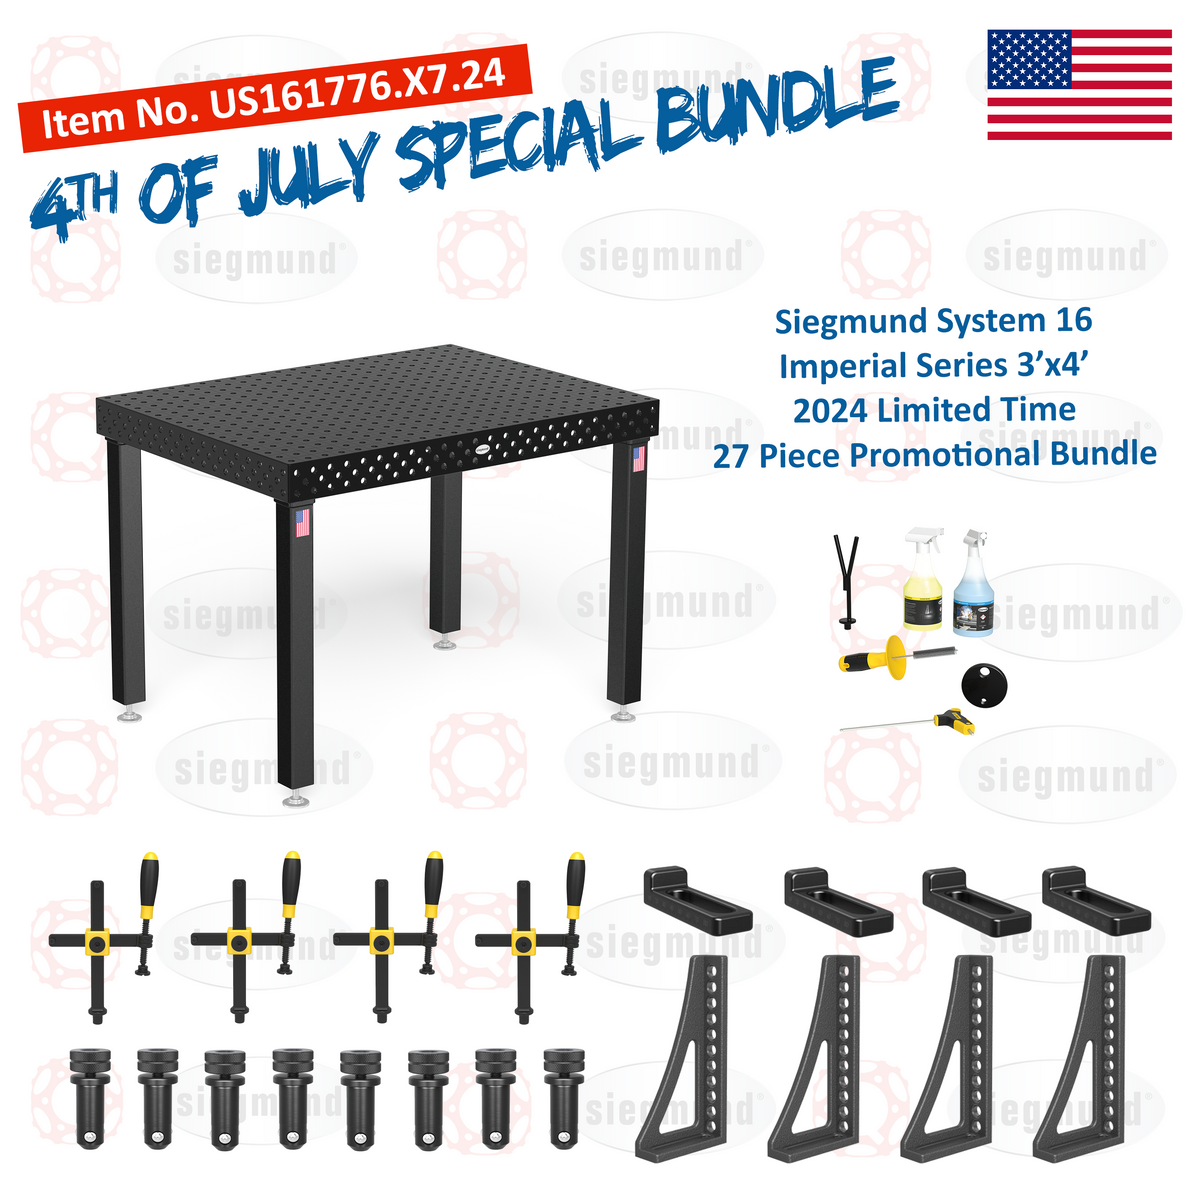 US161776.X7.24: System 16 3'x4' (36"x48") Imperial 8.7 Series (Inch) Welding Table 27 Piece Bundle (JULY 4TH, 2024 SPECIAL PROMOTION)